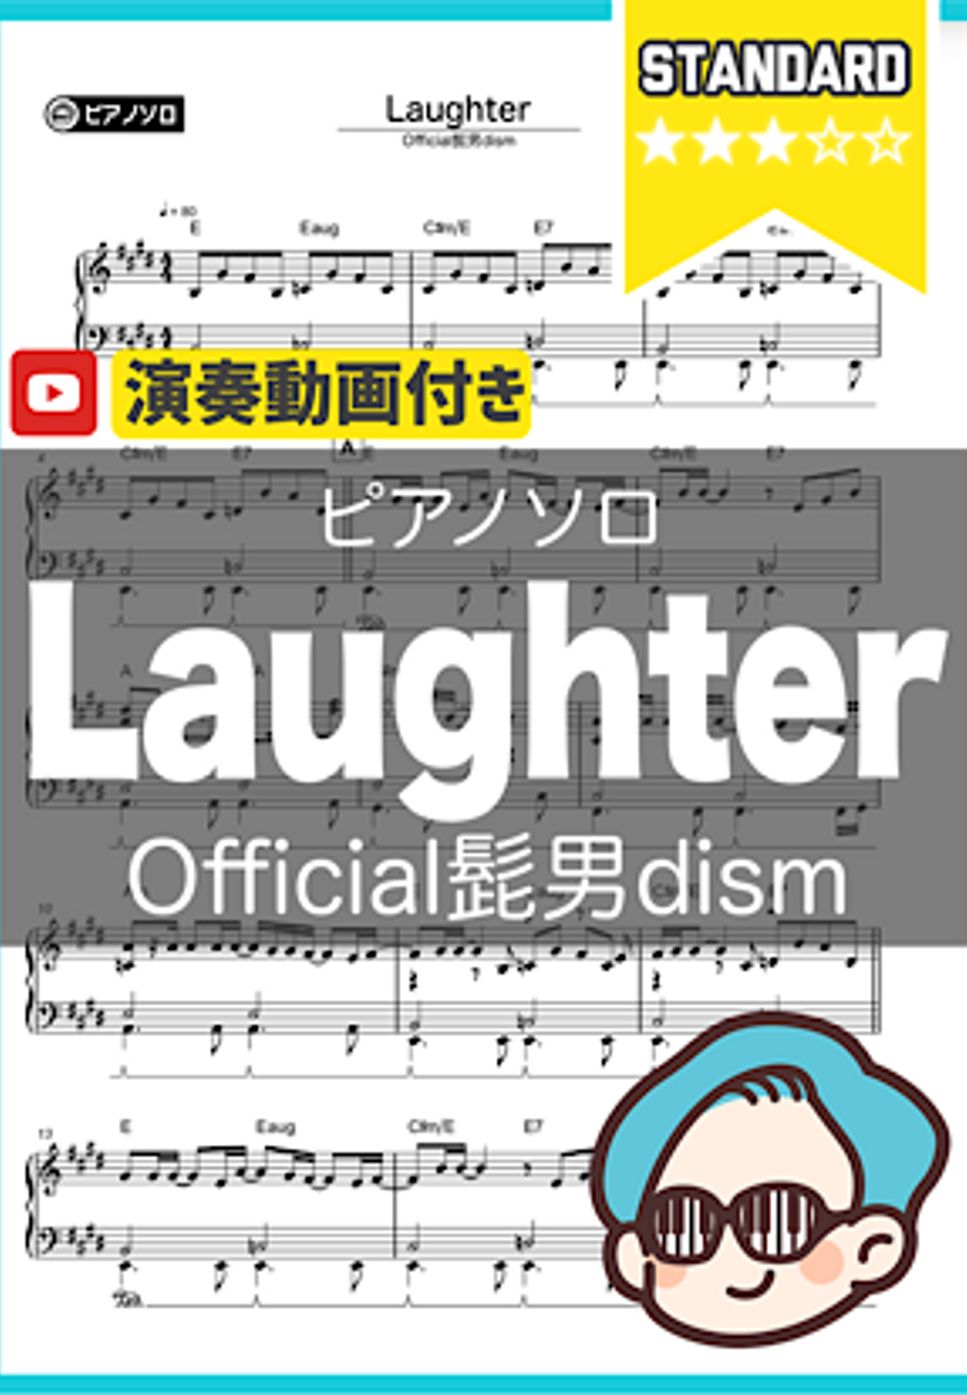 Official髭男dism - Laughter by THETA